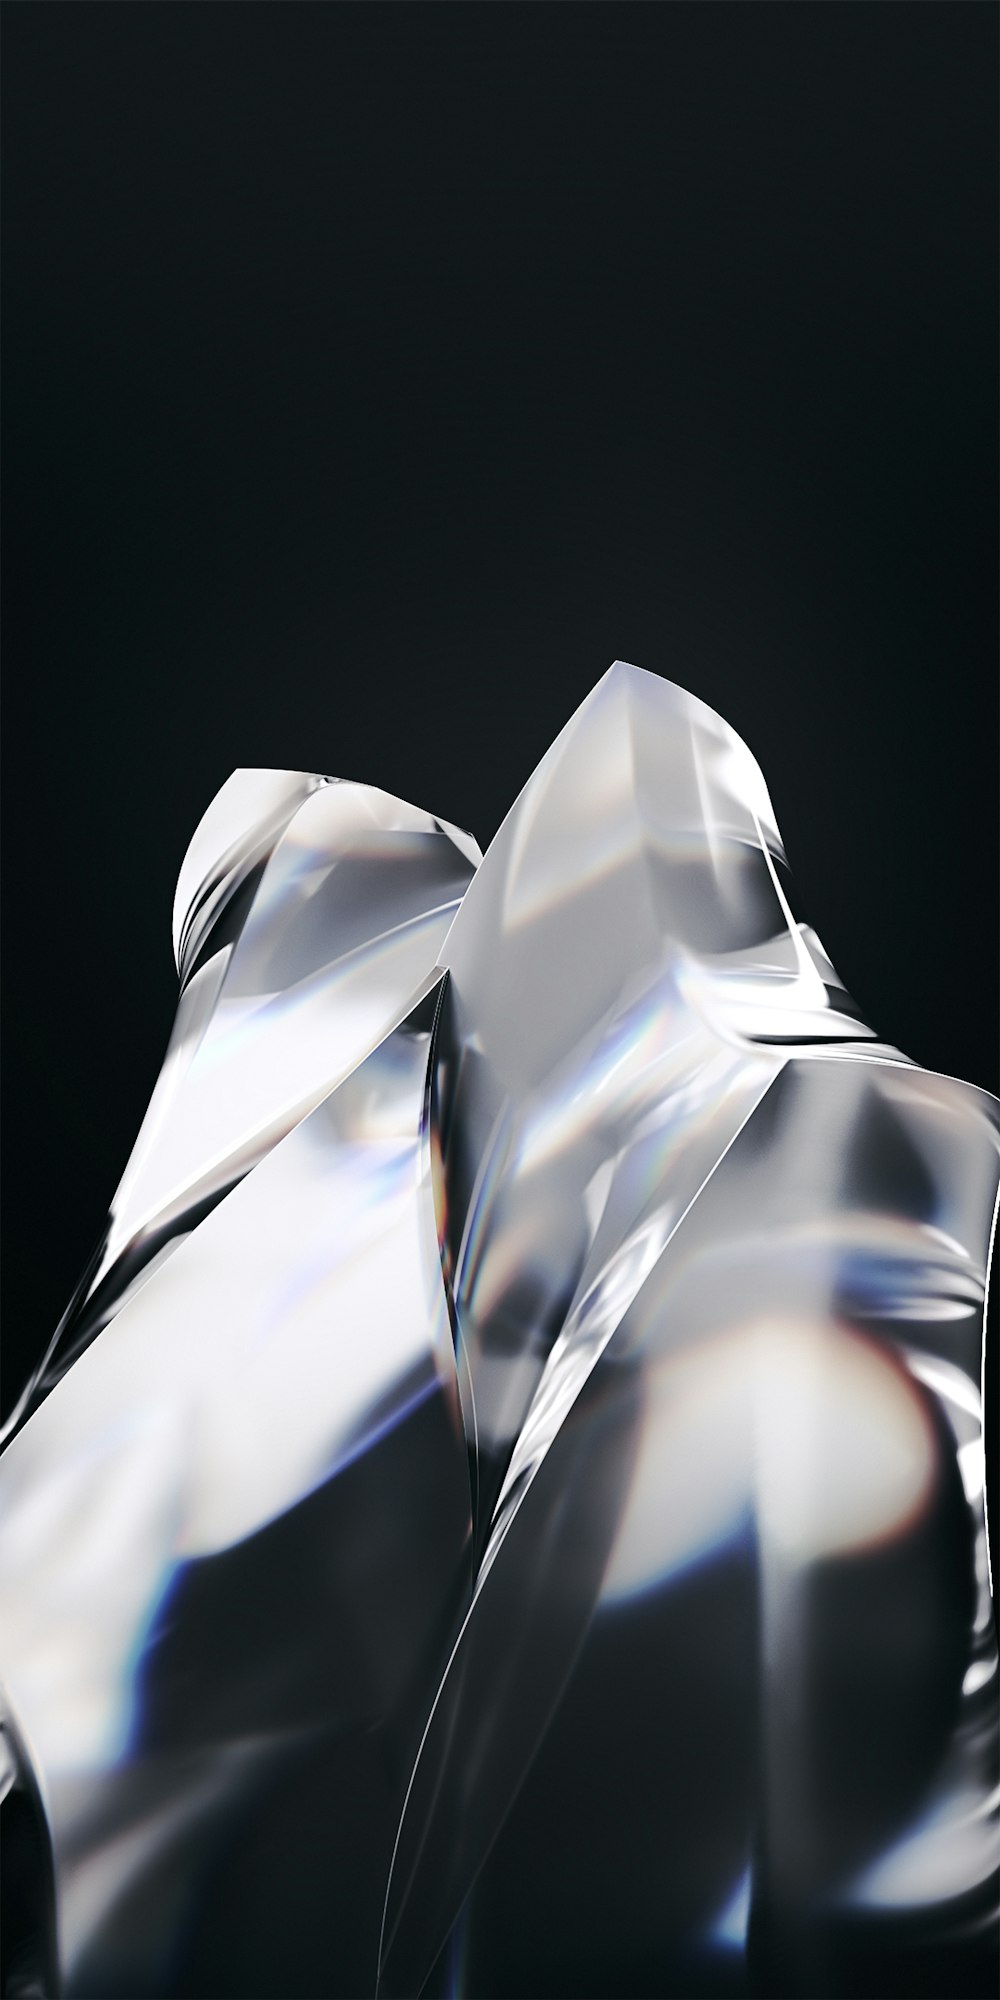 a shiny silver object with a black background